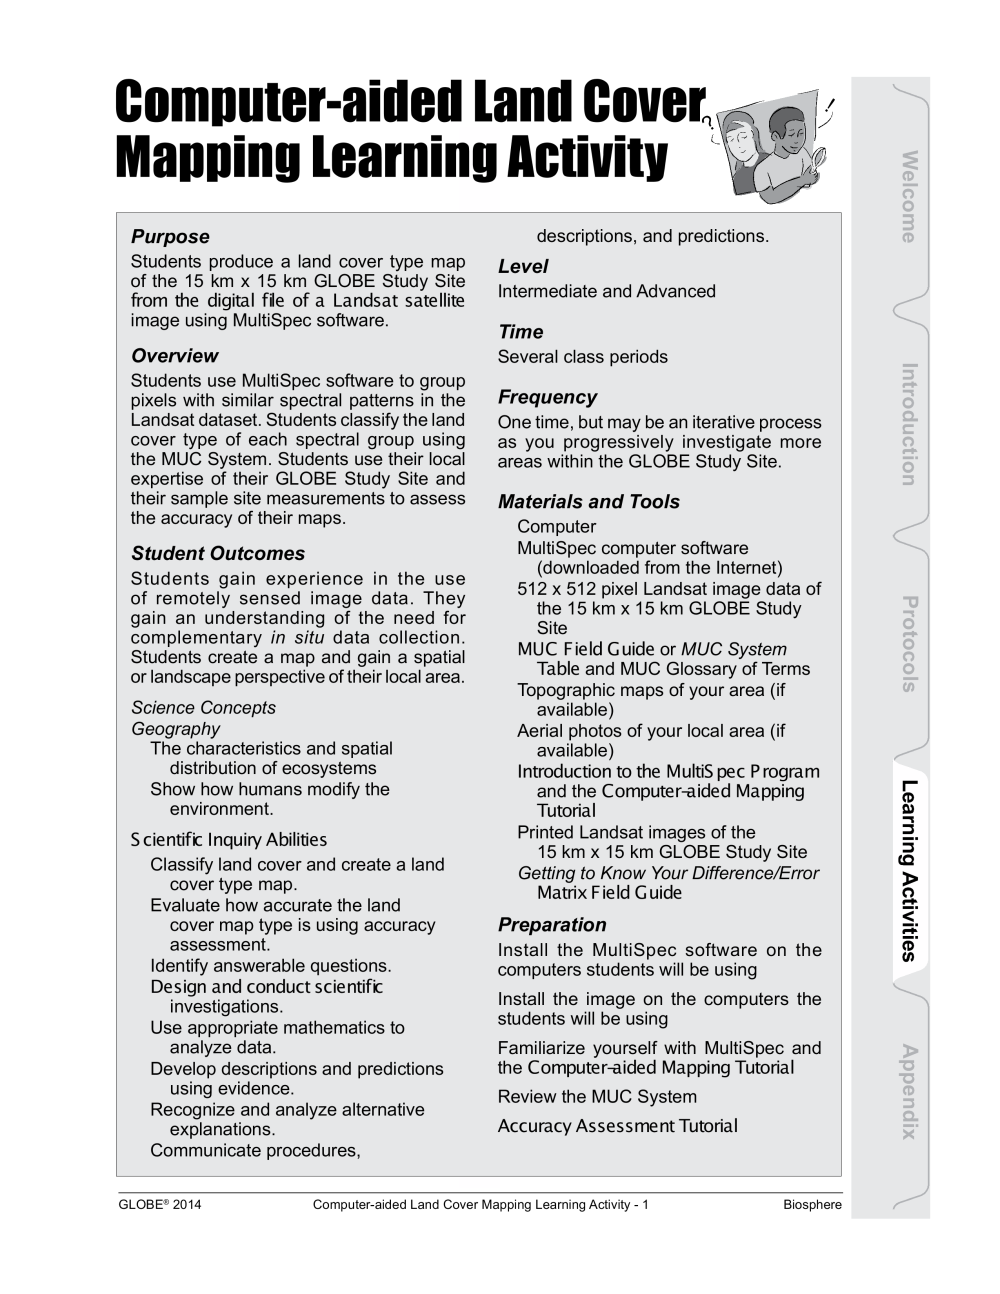 Learning Activities preview for Computer-aided Land Cover Mapping